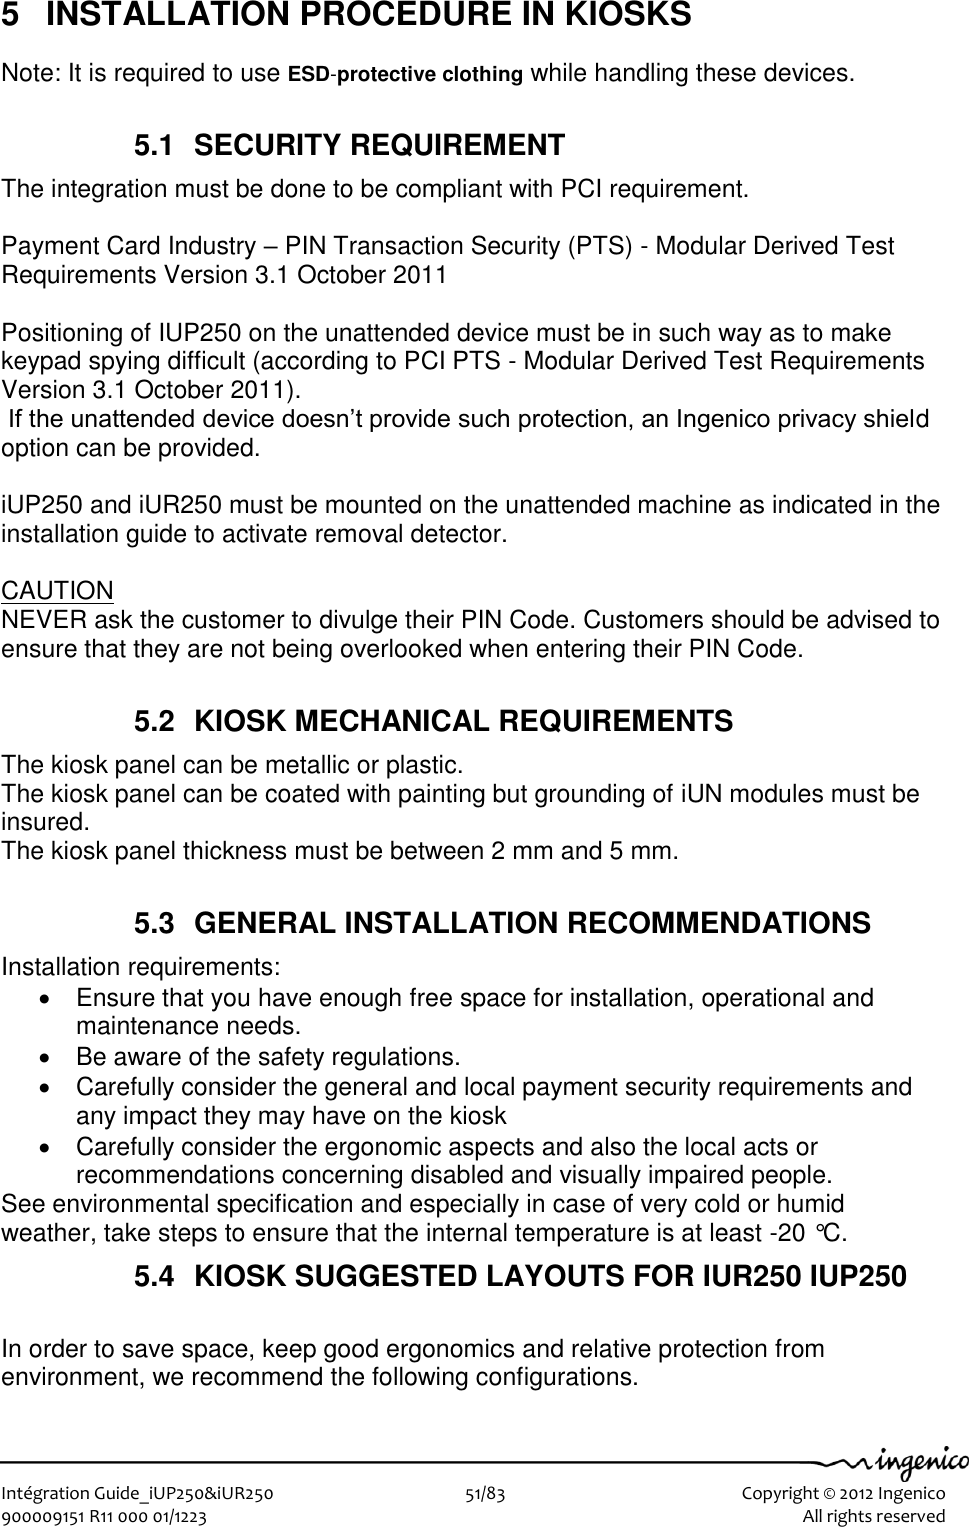   Intégration Guide_iUP250&amp;iUR250                        51/83    Copyright © 2012 Ingenico 900009151 R11 000 01/1223      All rights reserved   5  INSTALLATION PROCEDURE IN KIOSKS Note: It is required to use ESD-protective clothing while handling these devices.  5.1  SECURITY REQUIREMENT The integration must be done to be compliant with PCI requirement.  Payment Card Industry – PIN Transaction Security (PTS) - Modular Derived Test Requirements Version 3.1 October 2011  Positioning of IUP250 on the unattended device must be in such way as to make keypad spying difficult (according to PCI PTS - Modular Derived Test Requirements Version 3.1 October 2011).  If the unattended device doesn’t provide such protection, an Ingenico privacy shield option can be provided.  iUP250 and iUR250 must be mounted on the unattended machine as indicated in the installation guide to activate removal detector.  CAUTION NEVER ask the customer to divulge their PIN Code. Customers should be advised to ensure that they are not being overlooked when entering their PIN Code.  5.2  KIOSK MECHANICAL REQUIREMENTS The kiosk panel can be metallic or plastic.  The kiosk panel can be coated with painting but grounding of iUN modules must be insured.  The kiosk panel thickness must be between 2 mm and 5 mm.  5.3  GENERAL INSTALLATION RECOMMENDATIONS Installation requirements:    Ensure that you have enough free space for installation, operational and maintenance needs.   Be aware of the safety regulations.   Carefully consider the general and local payment security requirements and any impact they may have on the kiosk   Carefully consider the ergonomic aspects and also the local acts or recommendations concerning disabled and visually impaired people. See environmental specification and especially in case of very cold or humid weather, take steps to ensure that the internal temperature is at least -20 °C. 5.4  KIOSK SUGGESTED LAYOUTS FOR IUR250 IUP250  In order to save space, keep good ergonomics and relative protection from environment, we recommend the following configurations.  